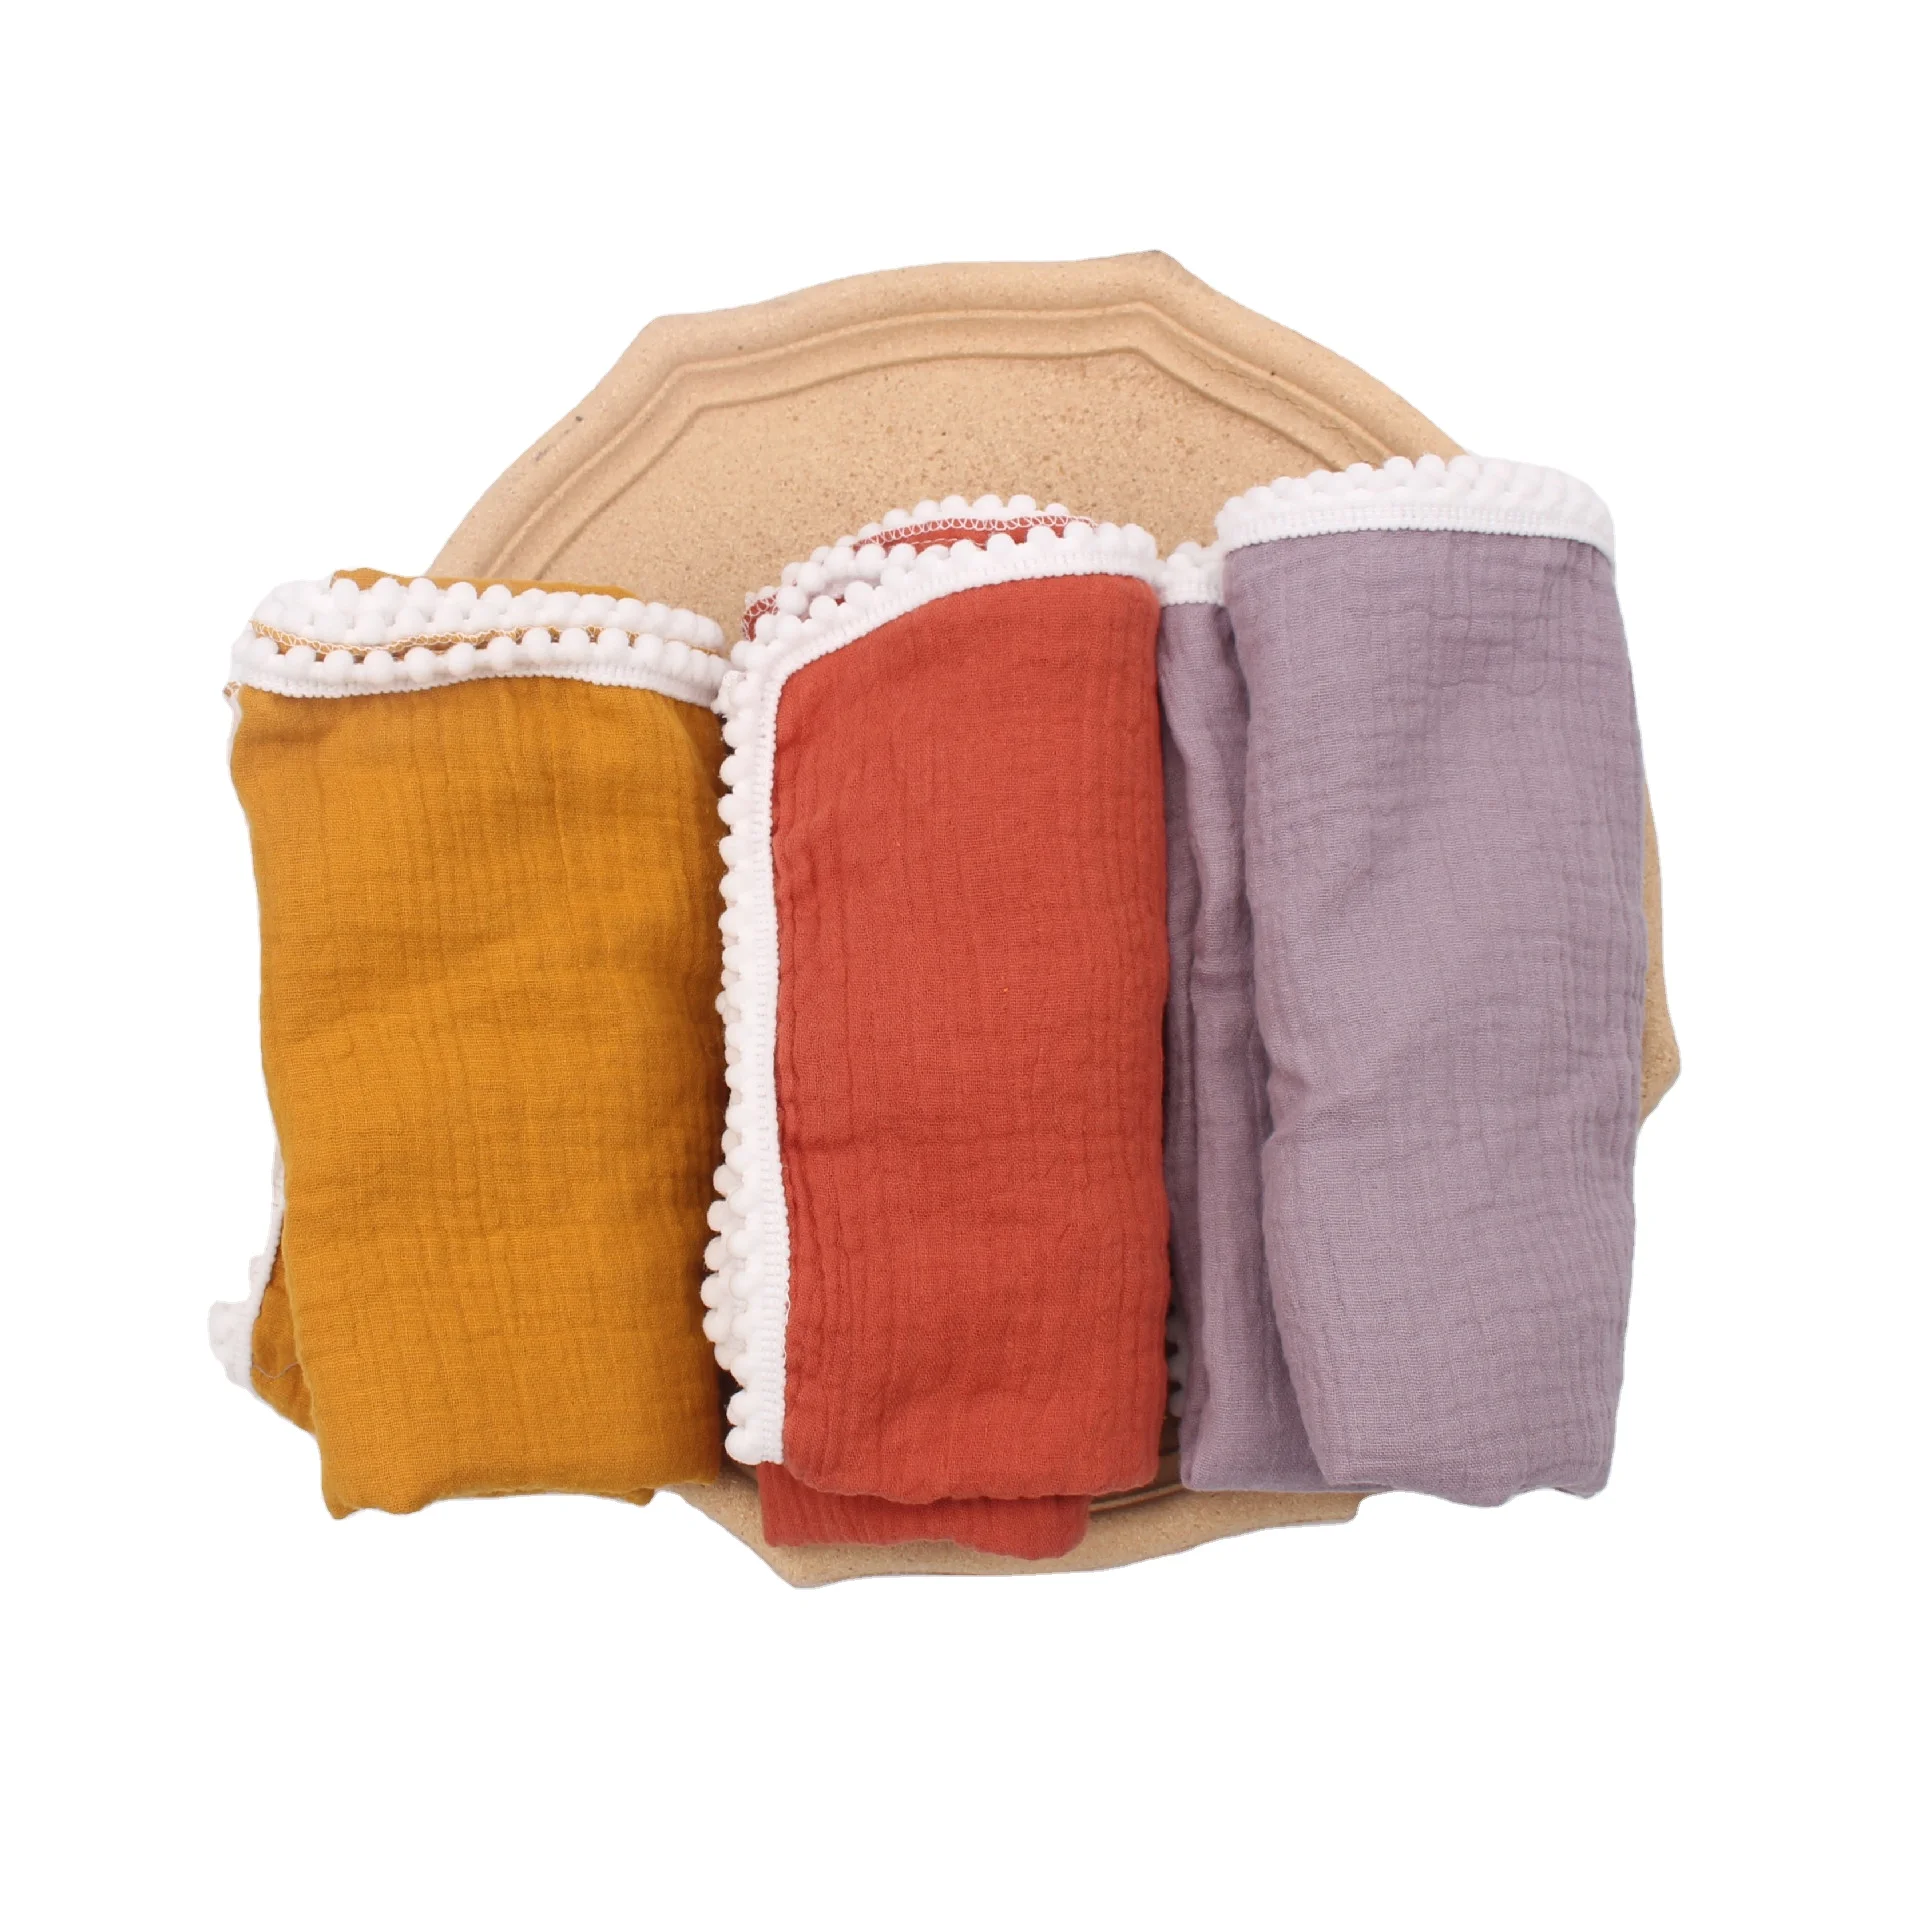 

100% organic cotton plain color muslin swaddle blanket in 2 layers